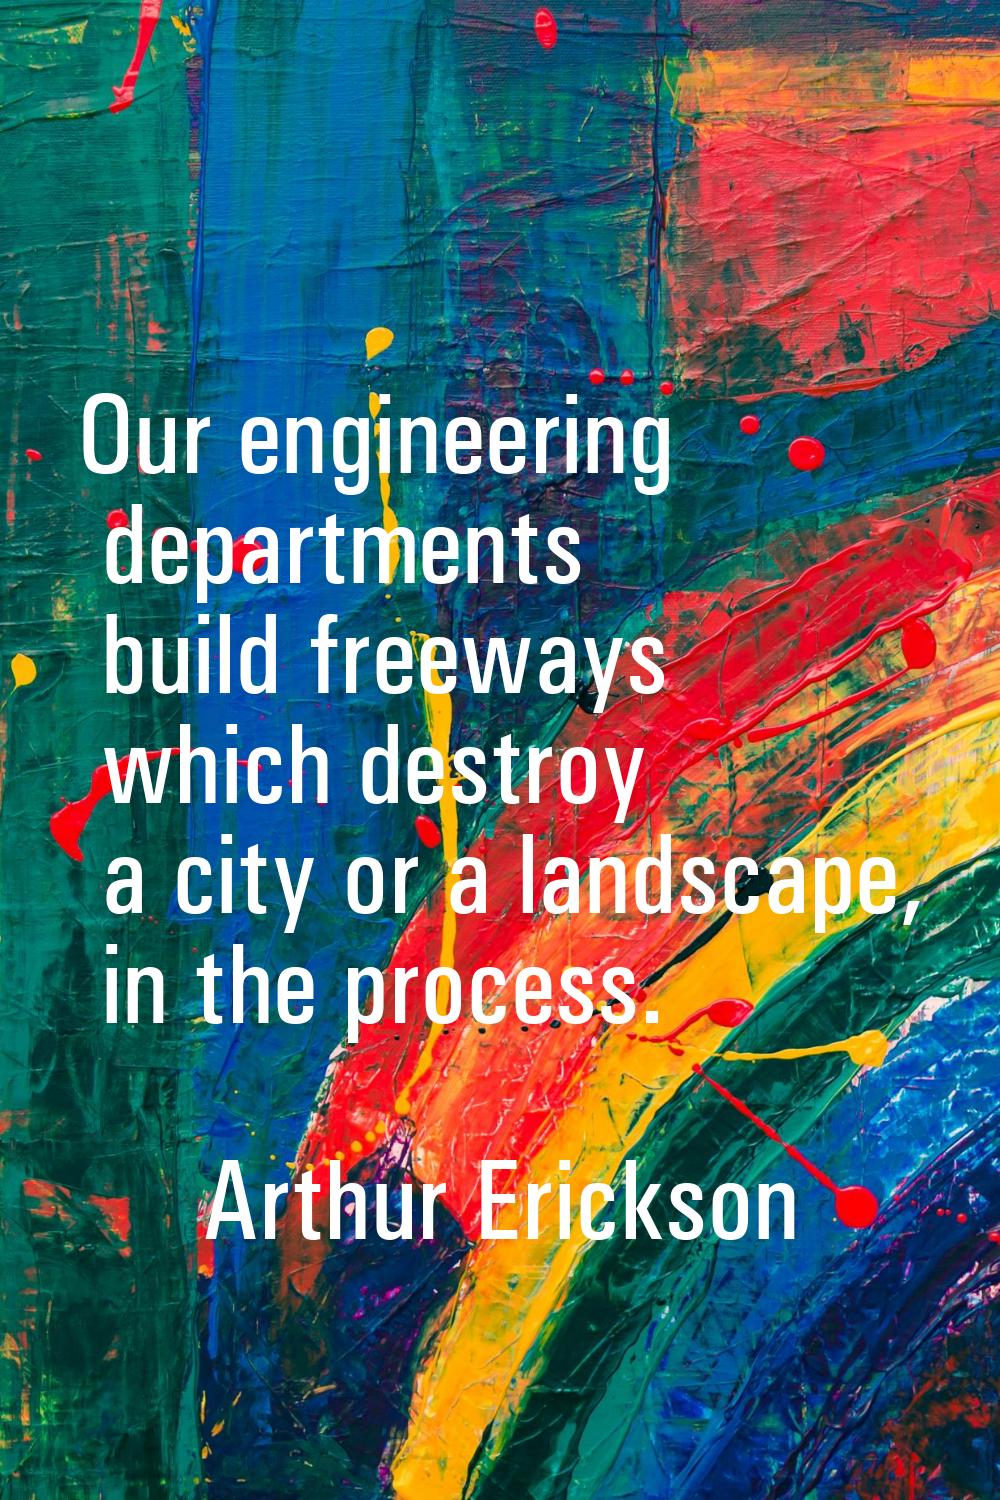 Our engineering departments build freeways which destroy a city or a landscape, in the process.